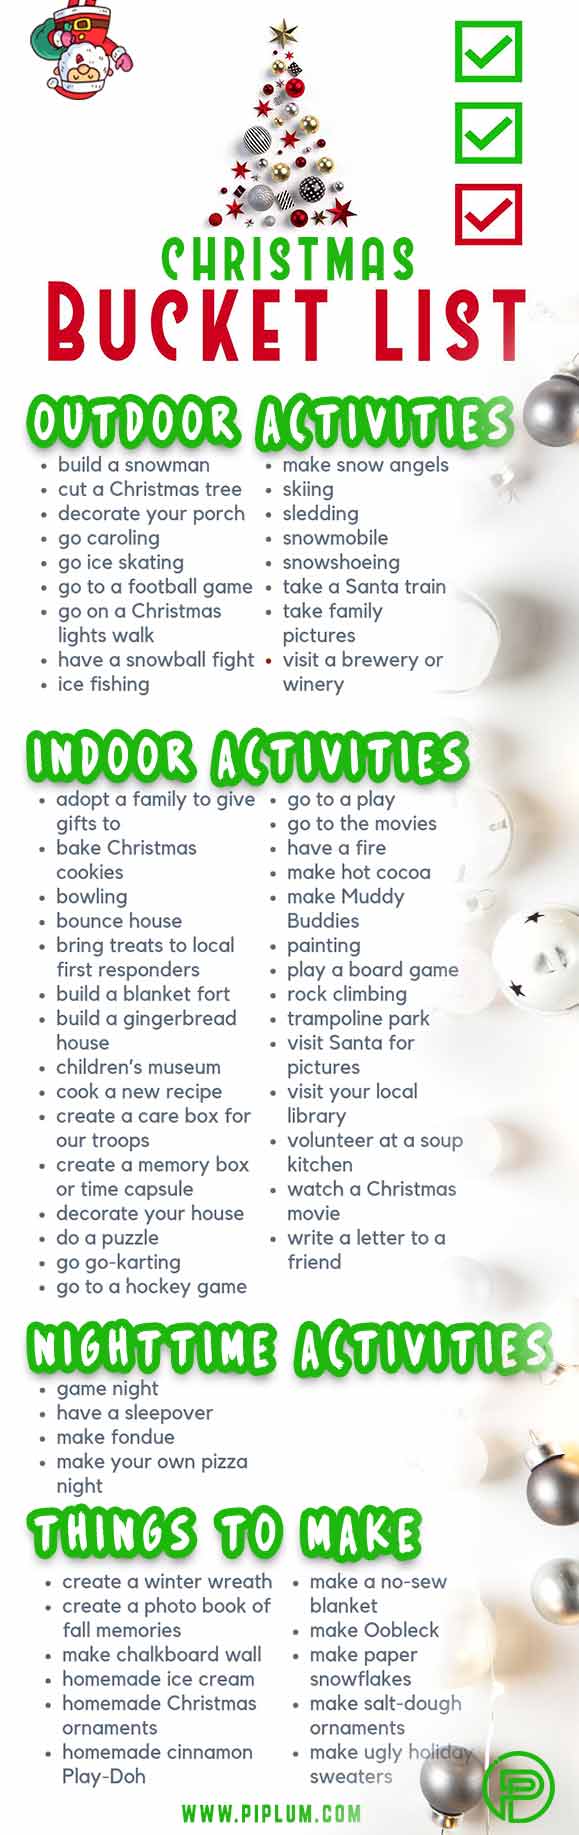 Christmas-activities-and-ideas-bucket-2021-2022-2023-2024-new-year 